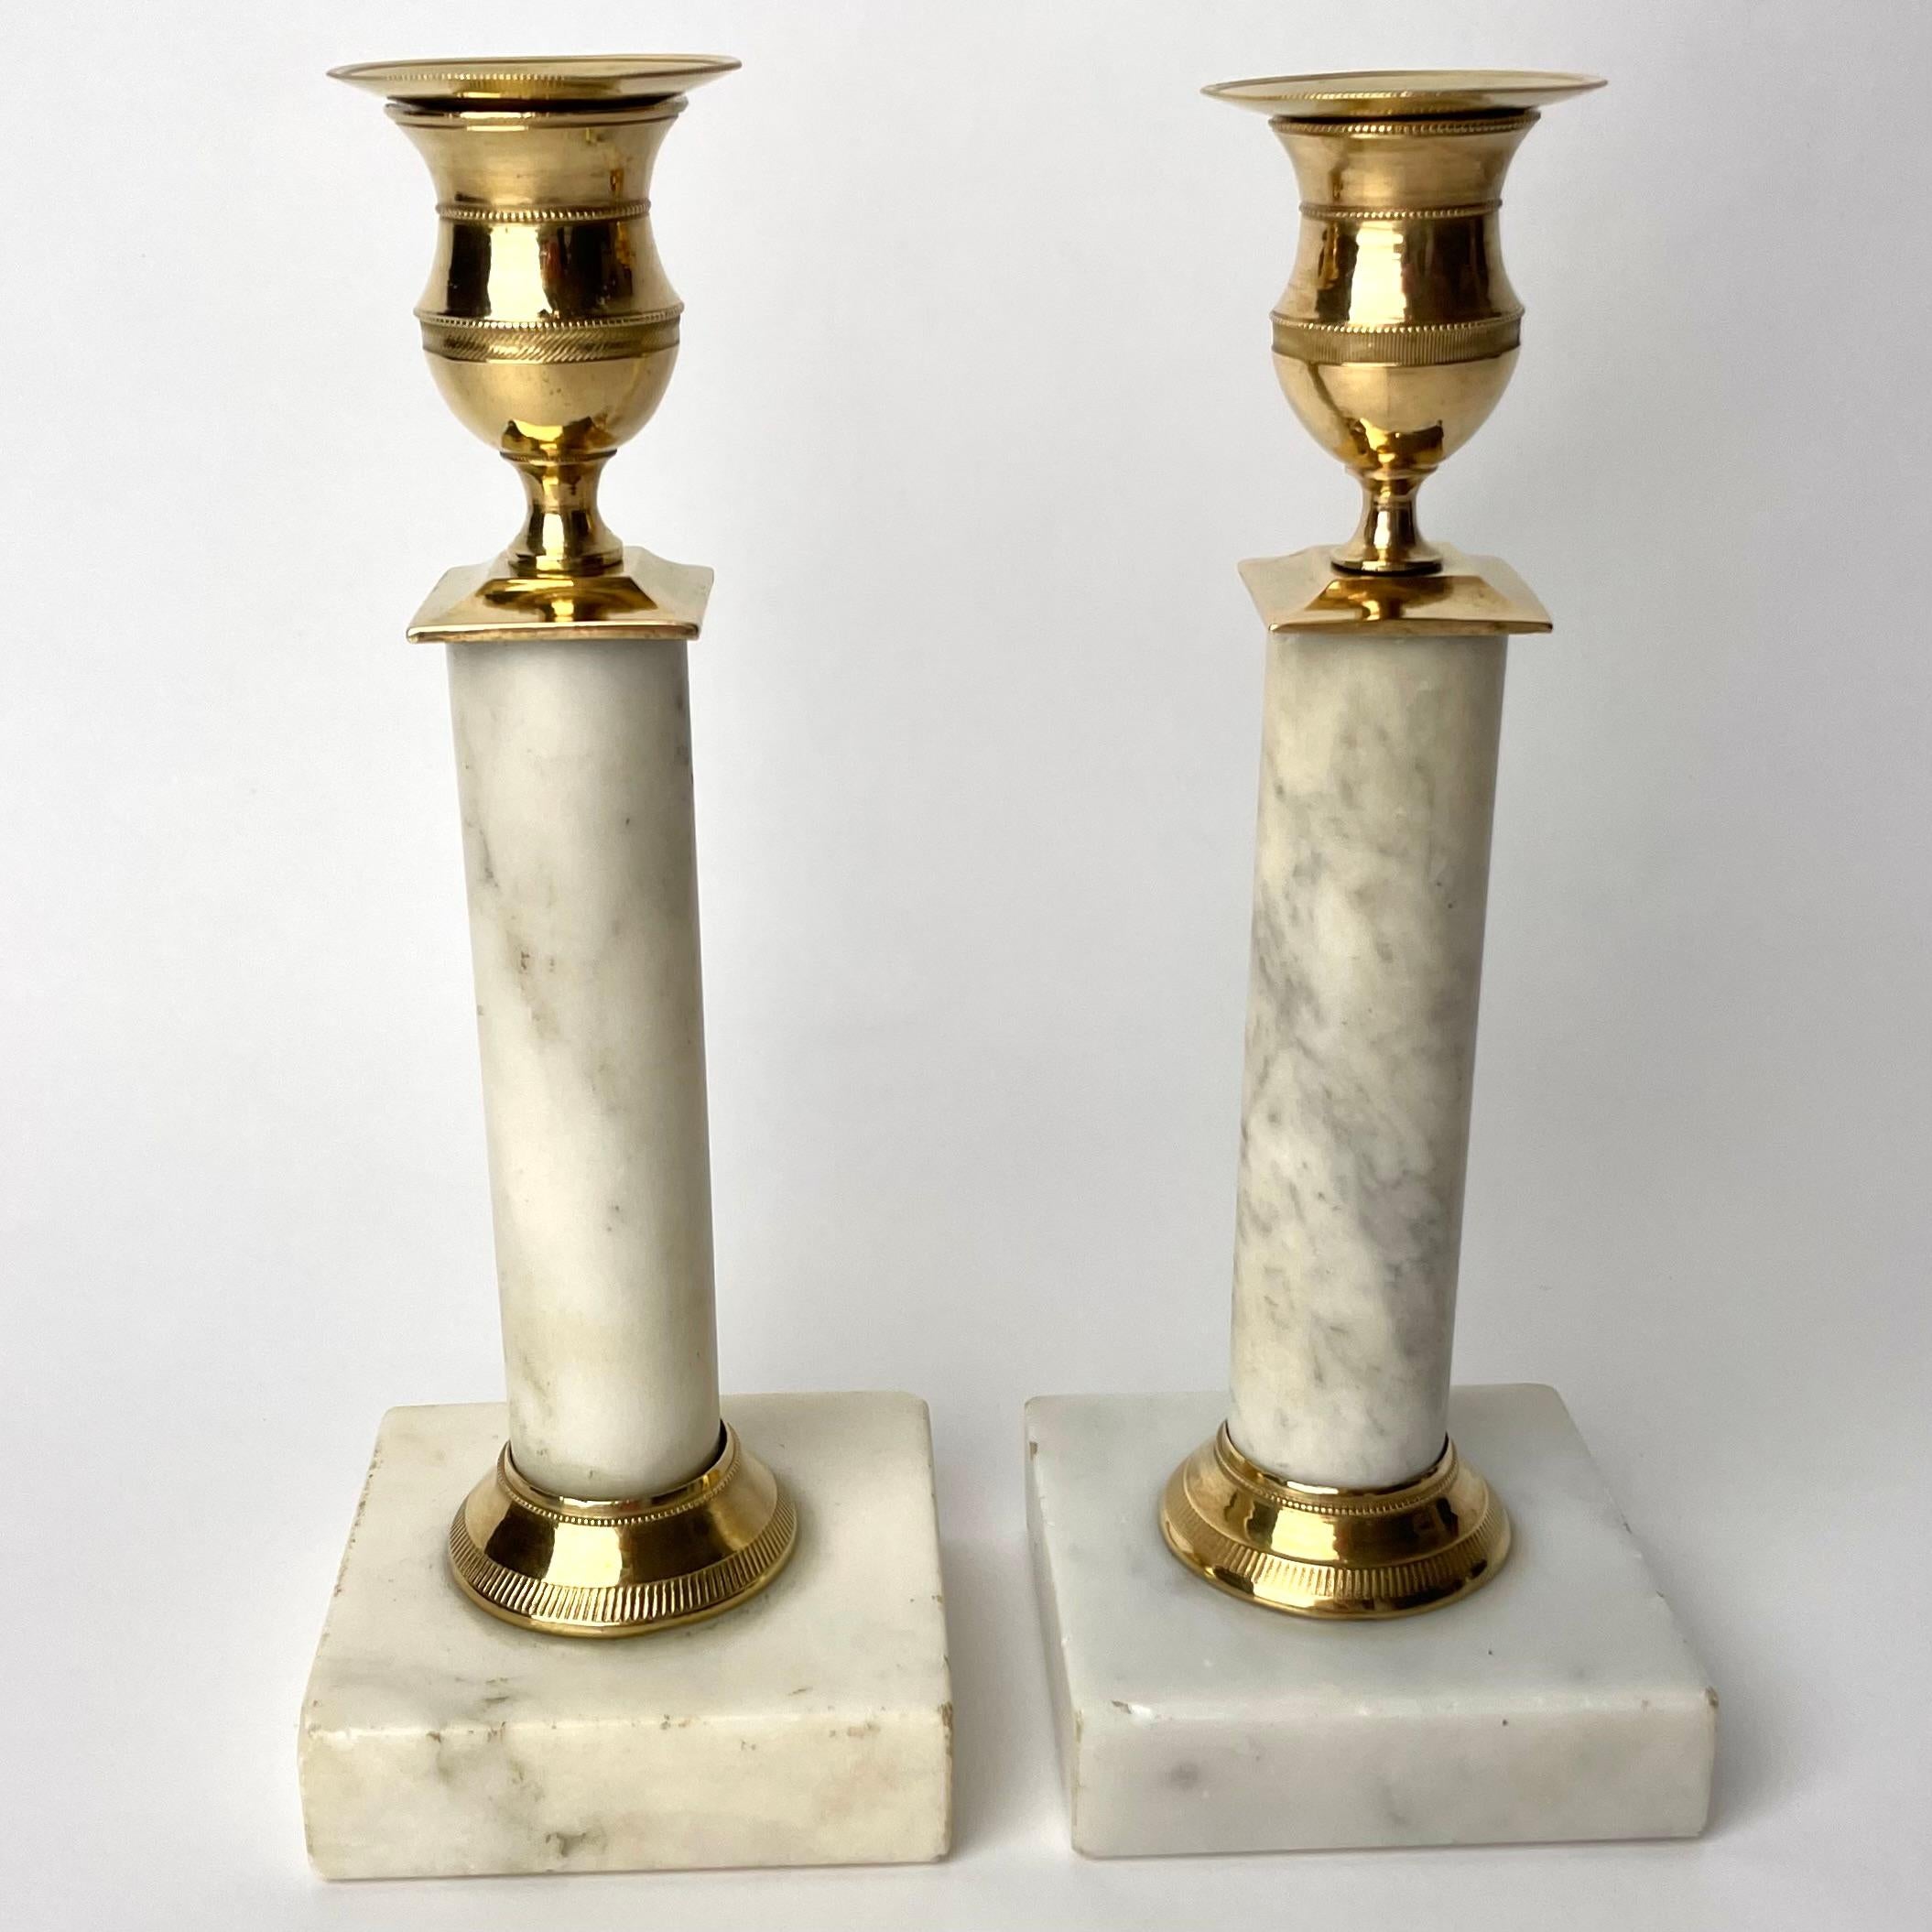 Elegant pair of Gustavian Carrara marble and Gilt brass Candlesticks from the 1790s. Simple beauty with some charming patina.

Wear consistent with age and use 